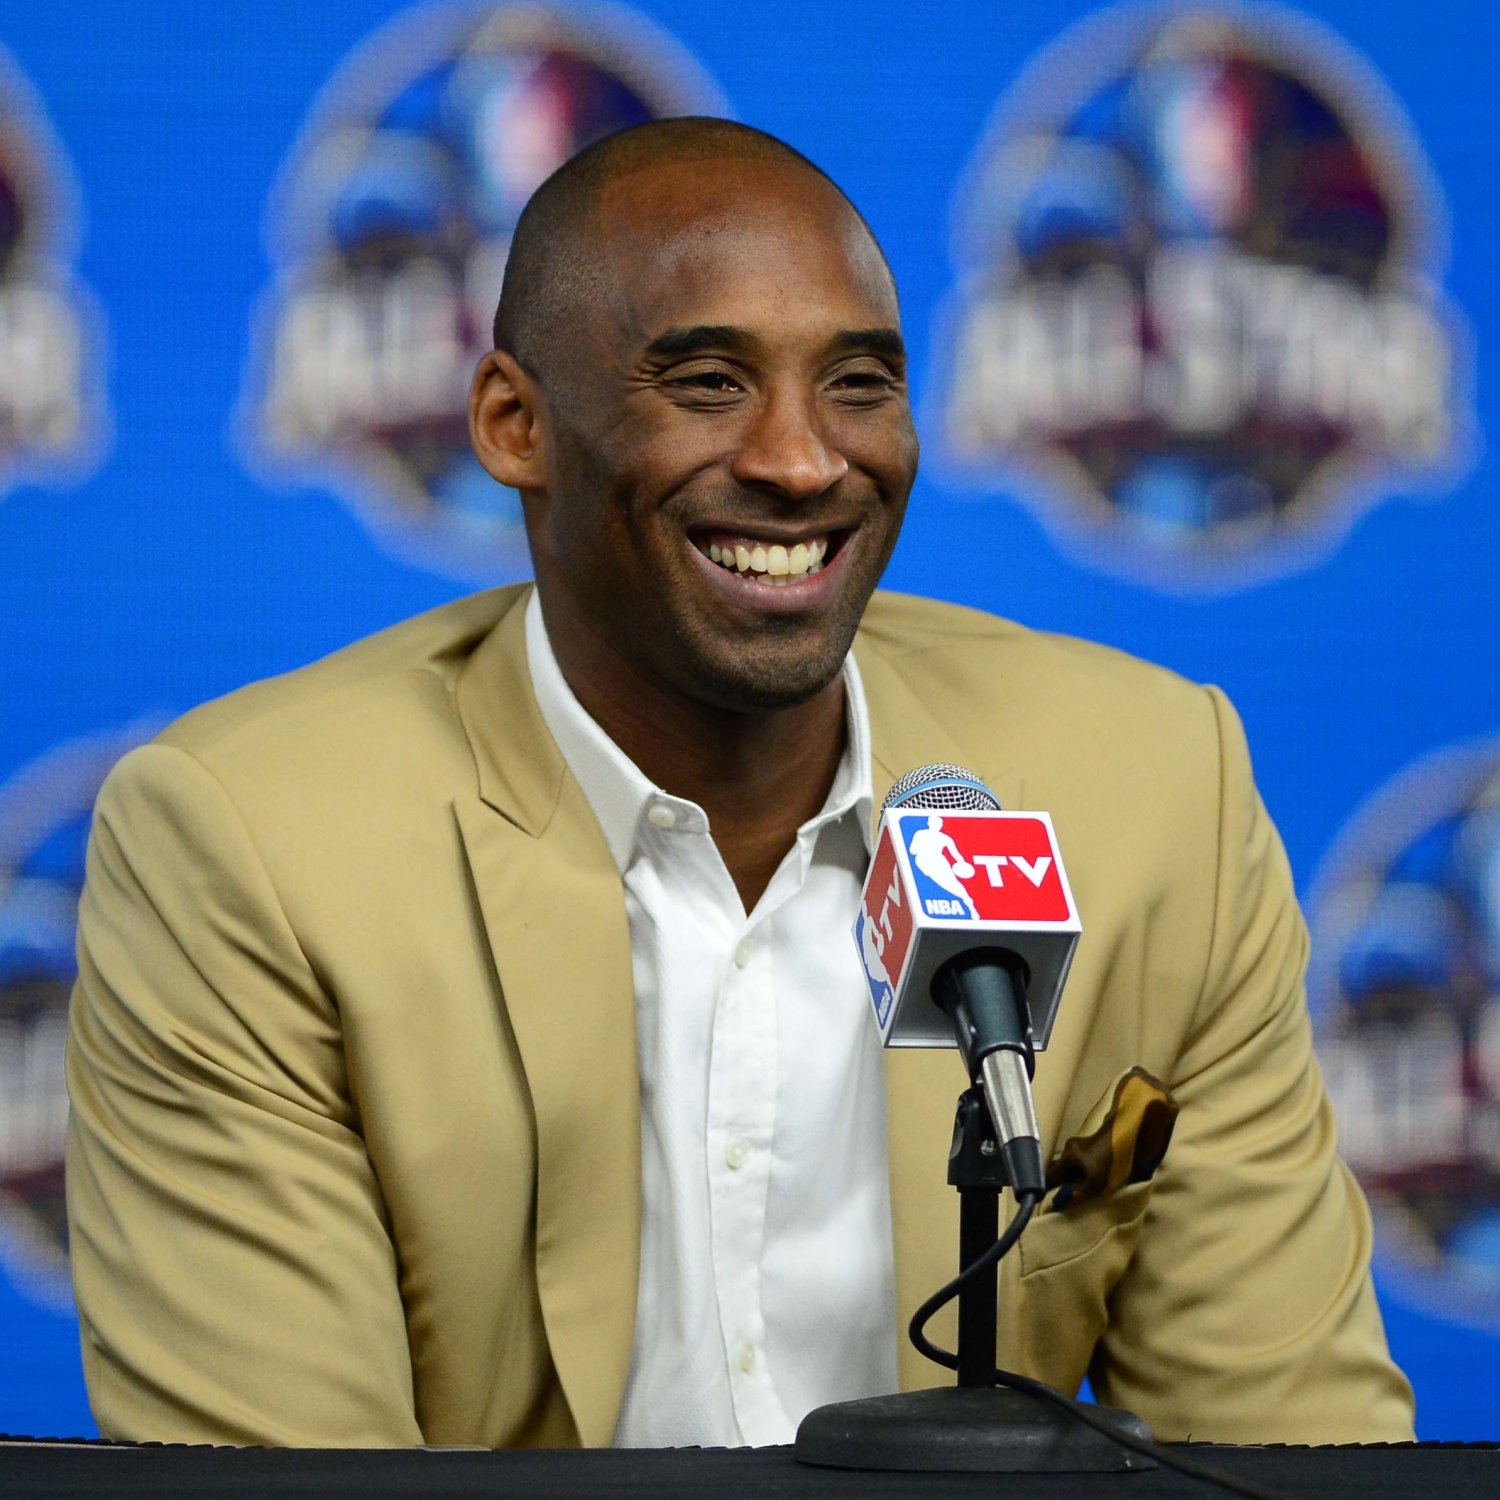 Kobe Bryant Launches New Company Kobe Inc. and Invests in Sports Drink | Bleacher Report1500 x 1500